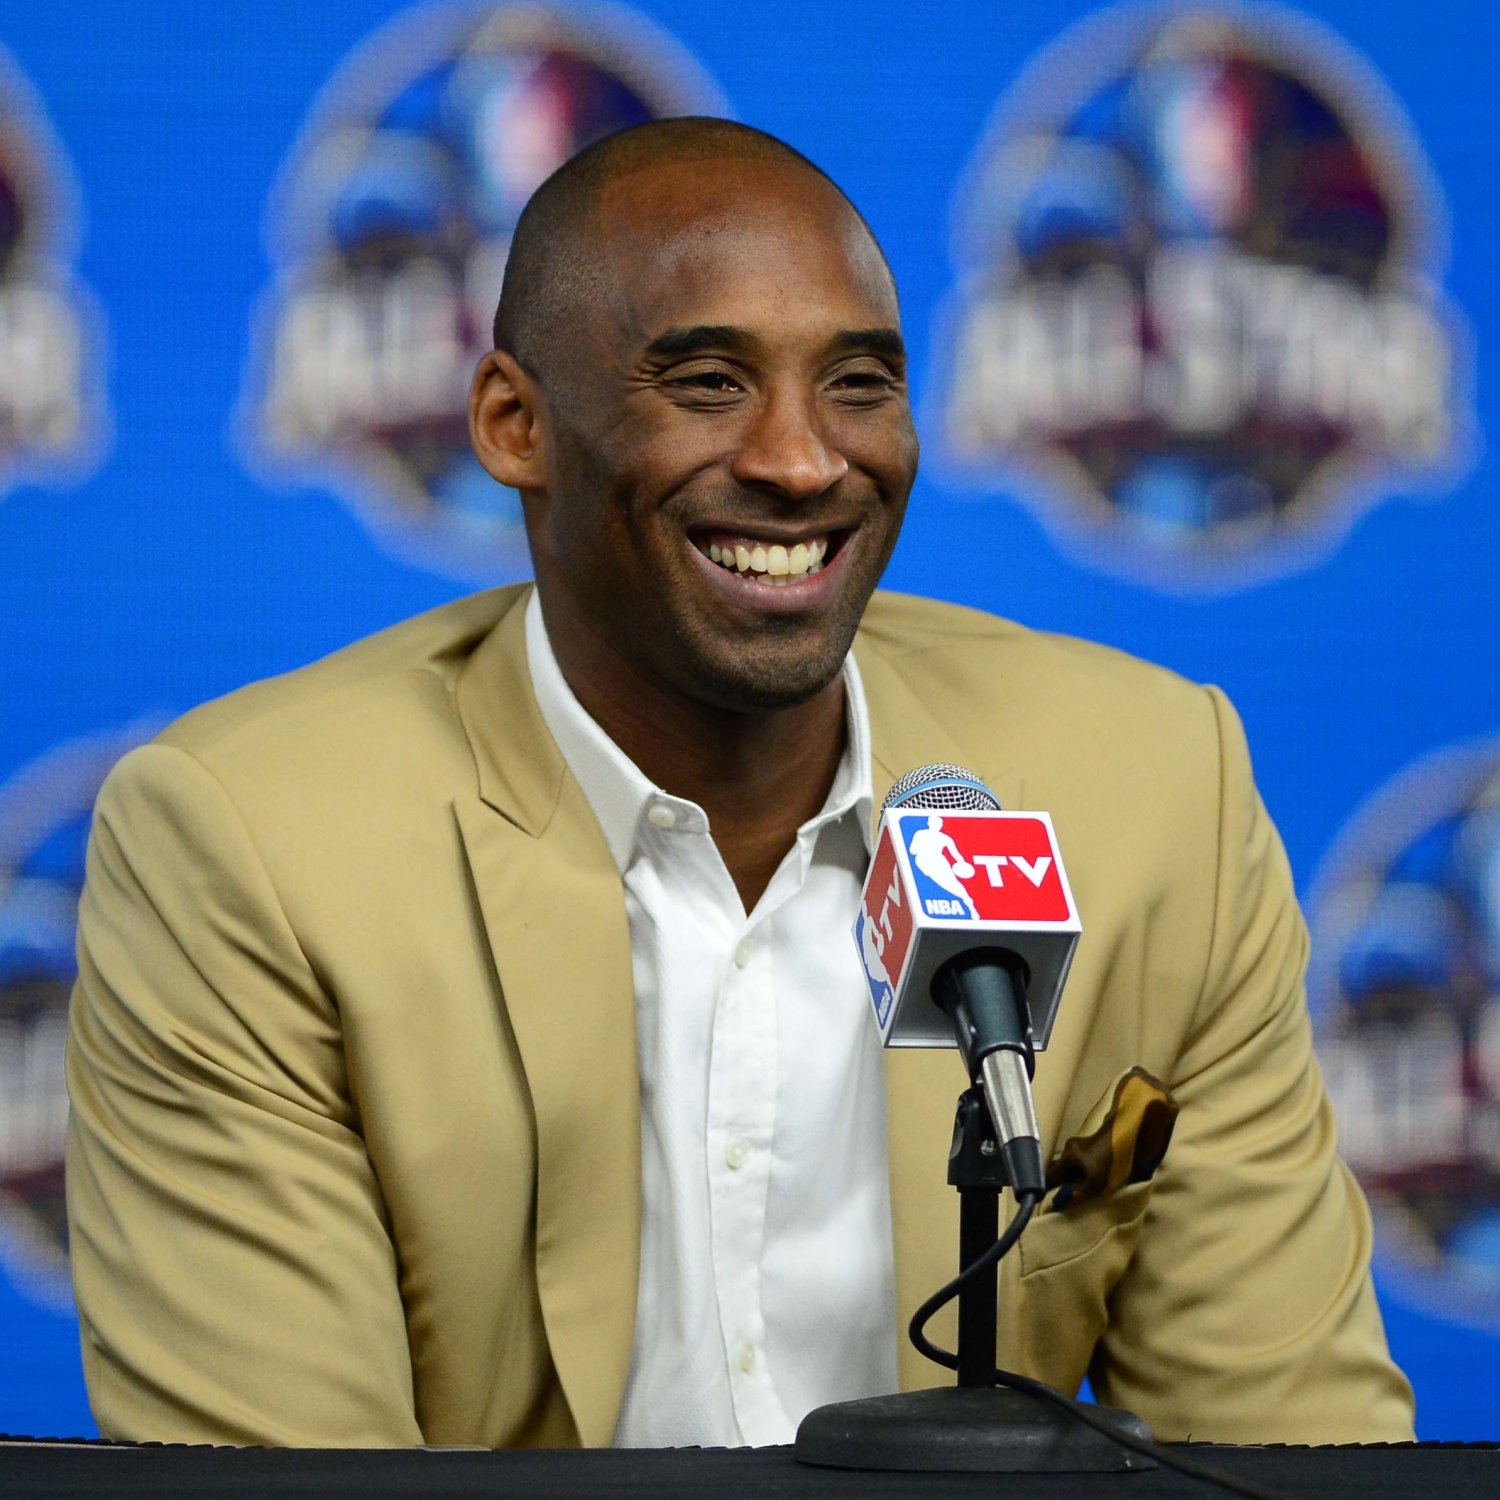 Kobe Bryant Launches New Company Kobe Inc. and Invests in Sports Drink | Bleacher Report1500 x 1500